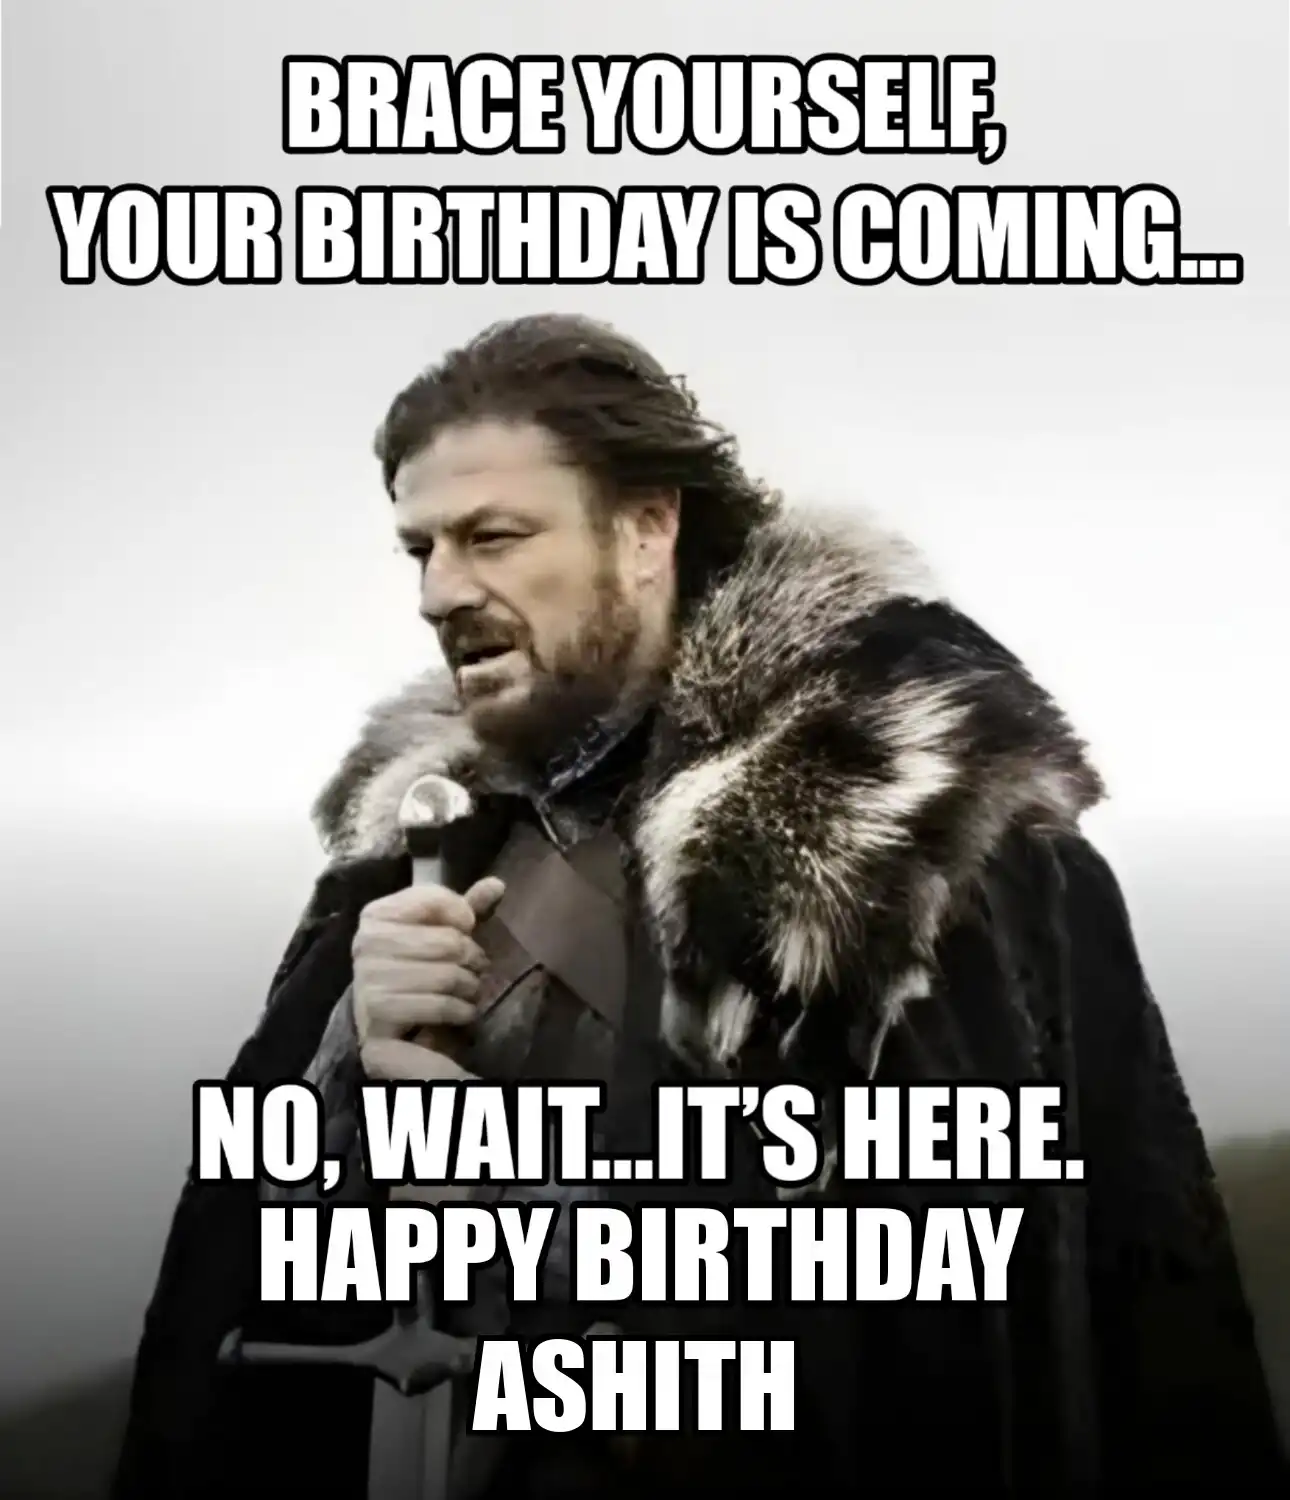 Happy Birthday Ashith Brace Yourself Your Birthday Is Coming Meme